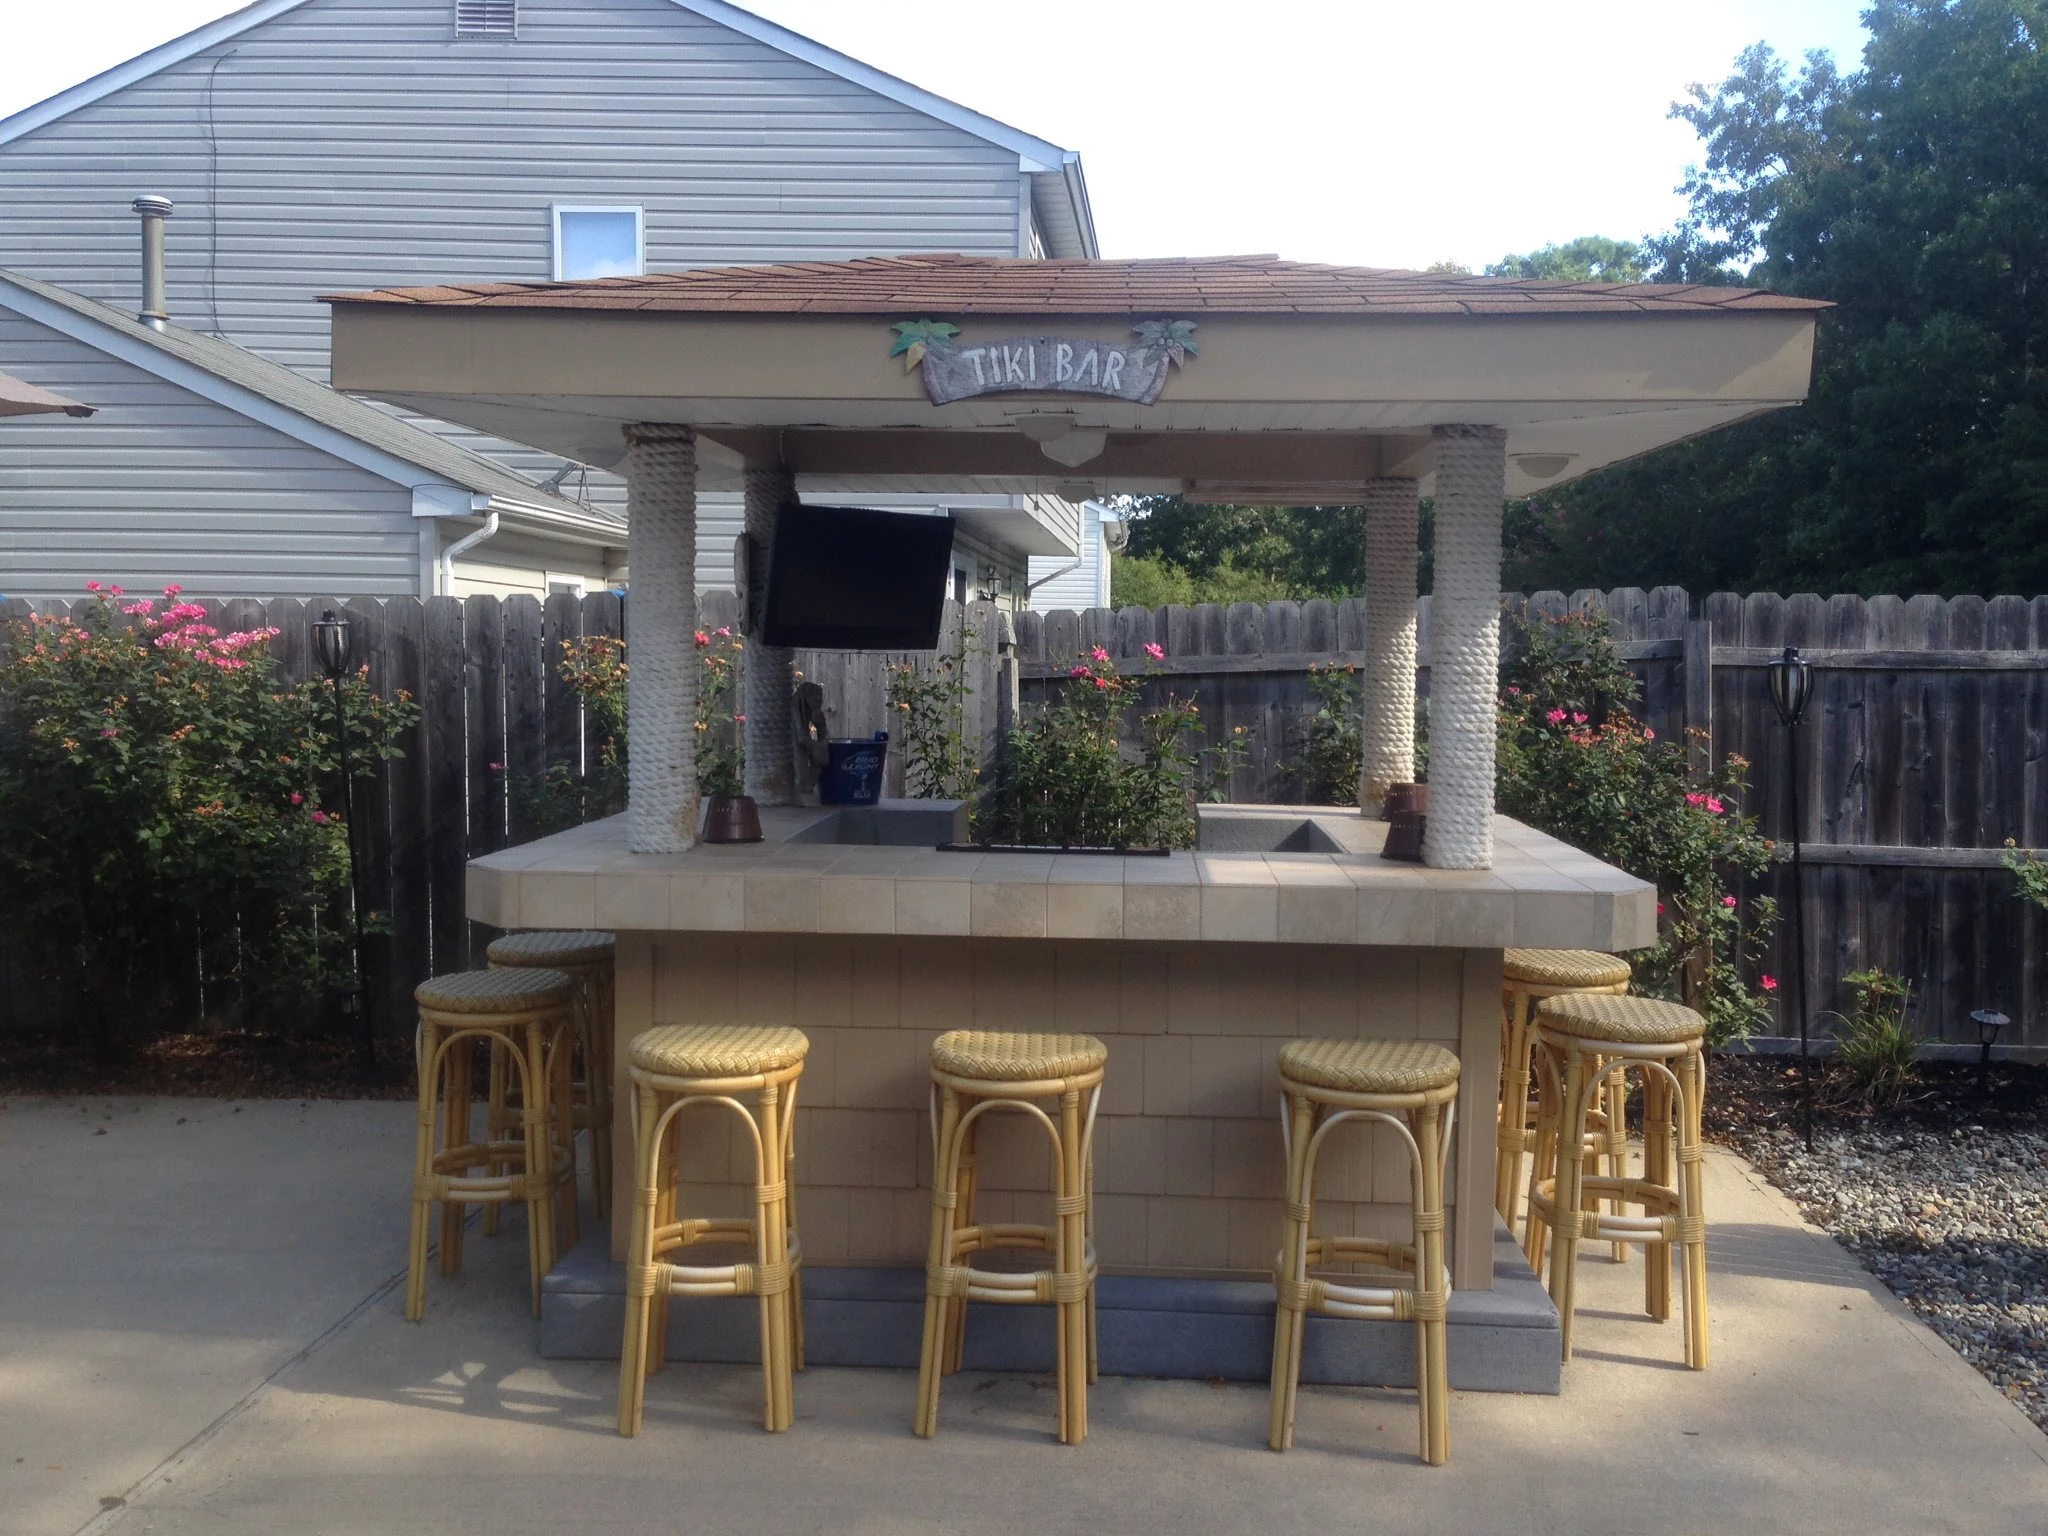 Backyard Bars In NJ If You Build It They Will Come